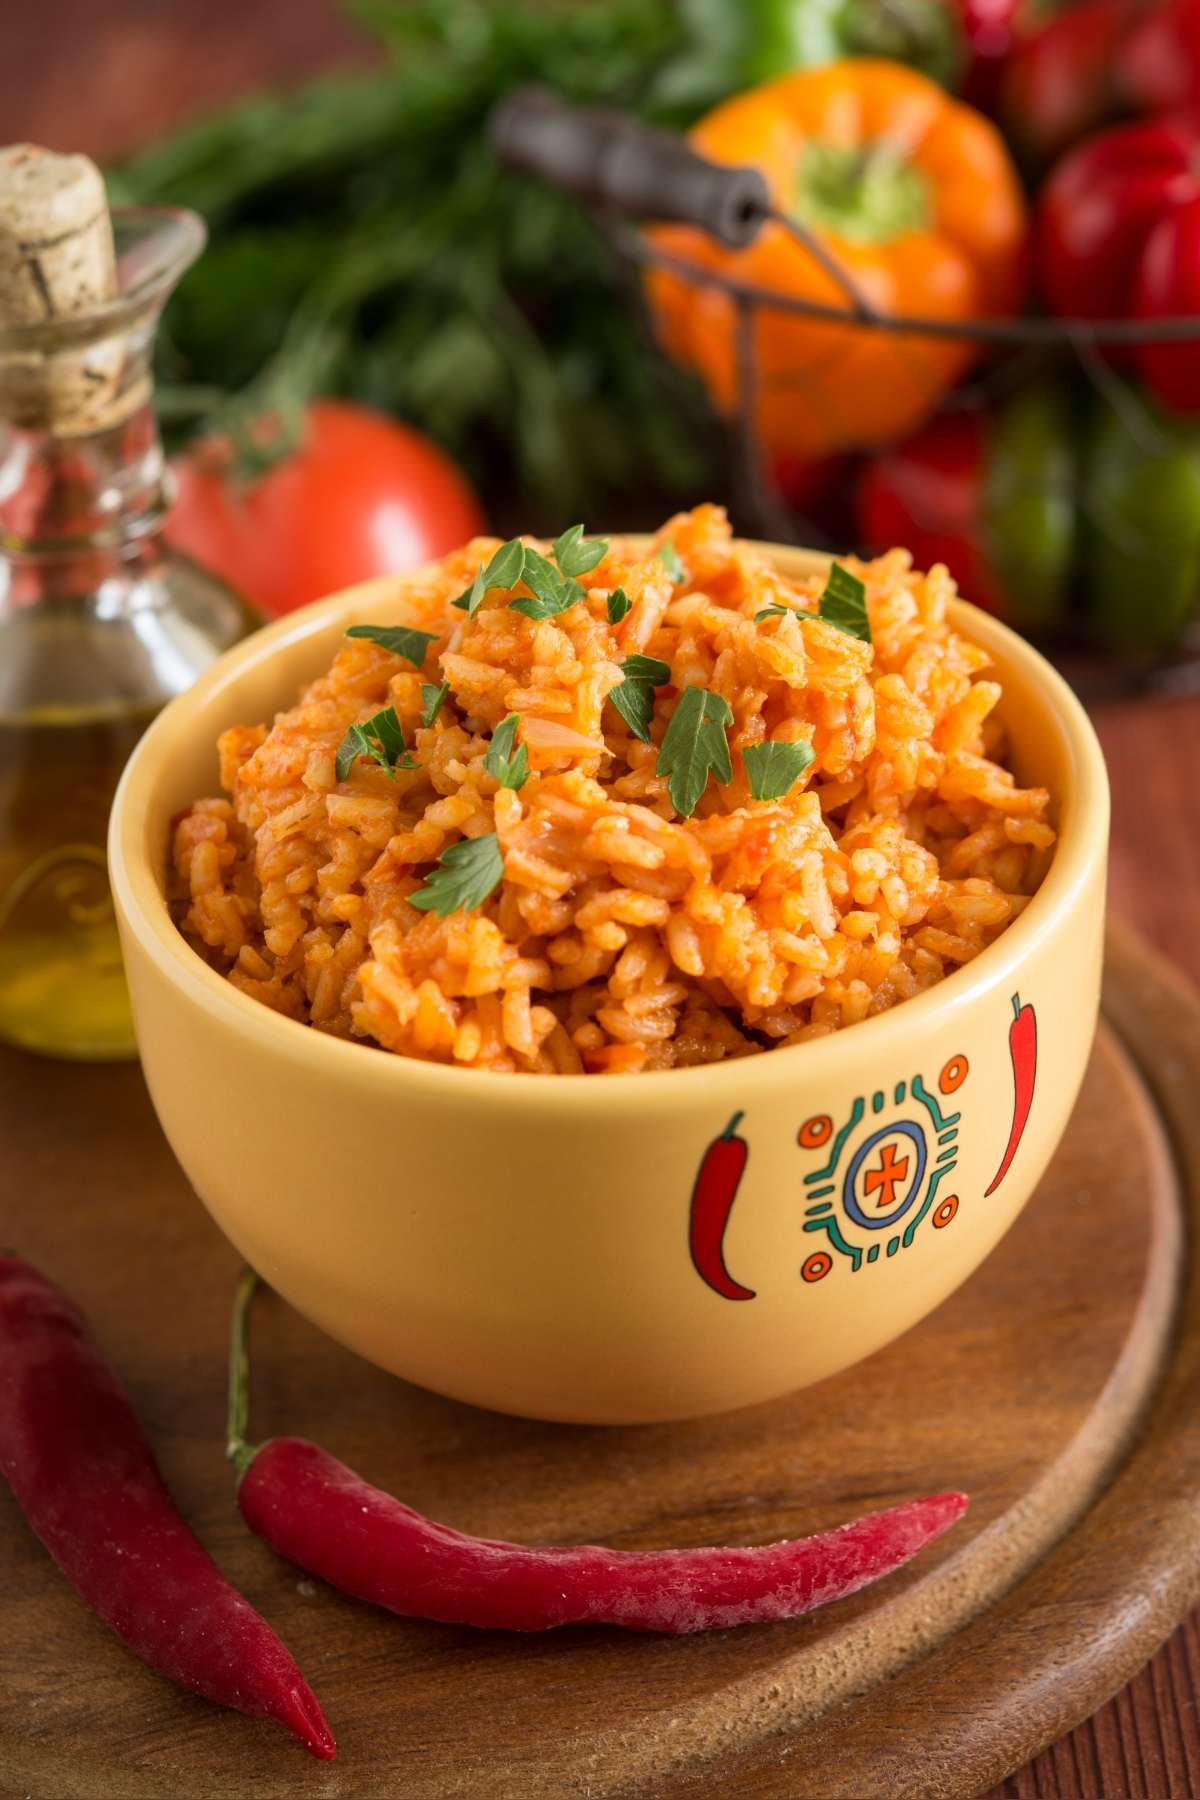 Add some serious flavor to regular rice by making this delicious Spanish rice. It’s perfectly seasoned, easy to make, and goes with just about anything!